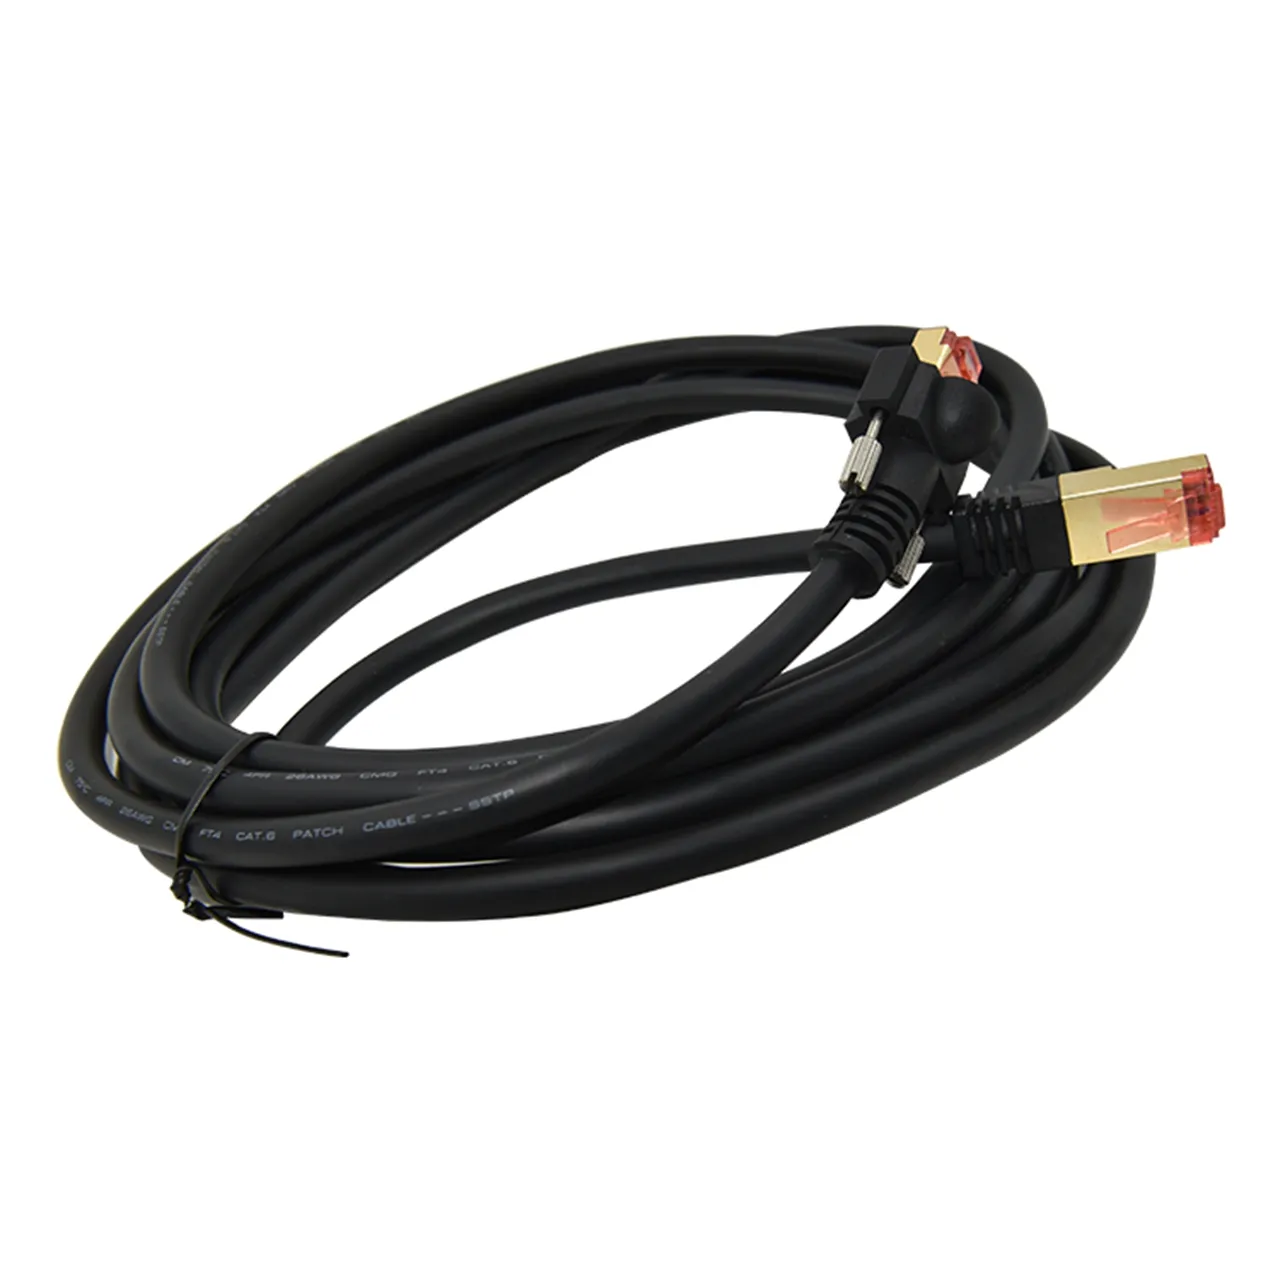 Best price 3/5/10m RJ45 GigE Data Cable soft fibre optic cable click-lock for Ethernet Machine Vision Camera Vision Datum